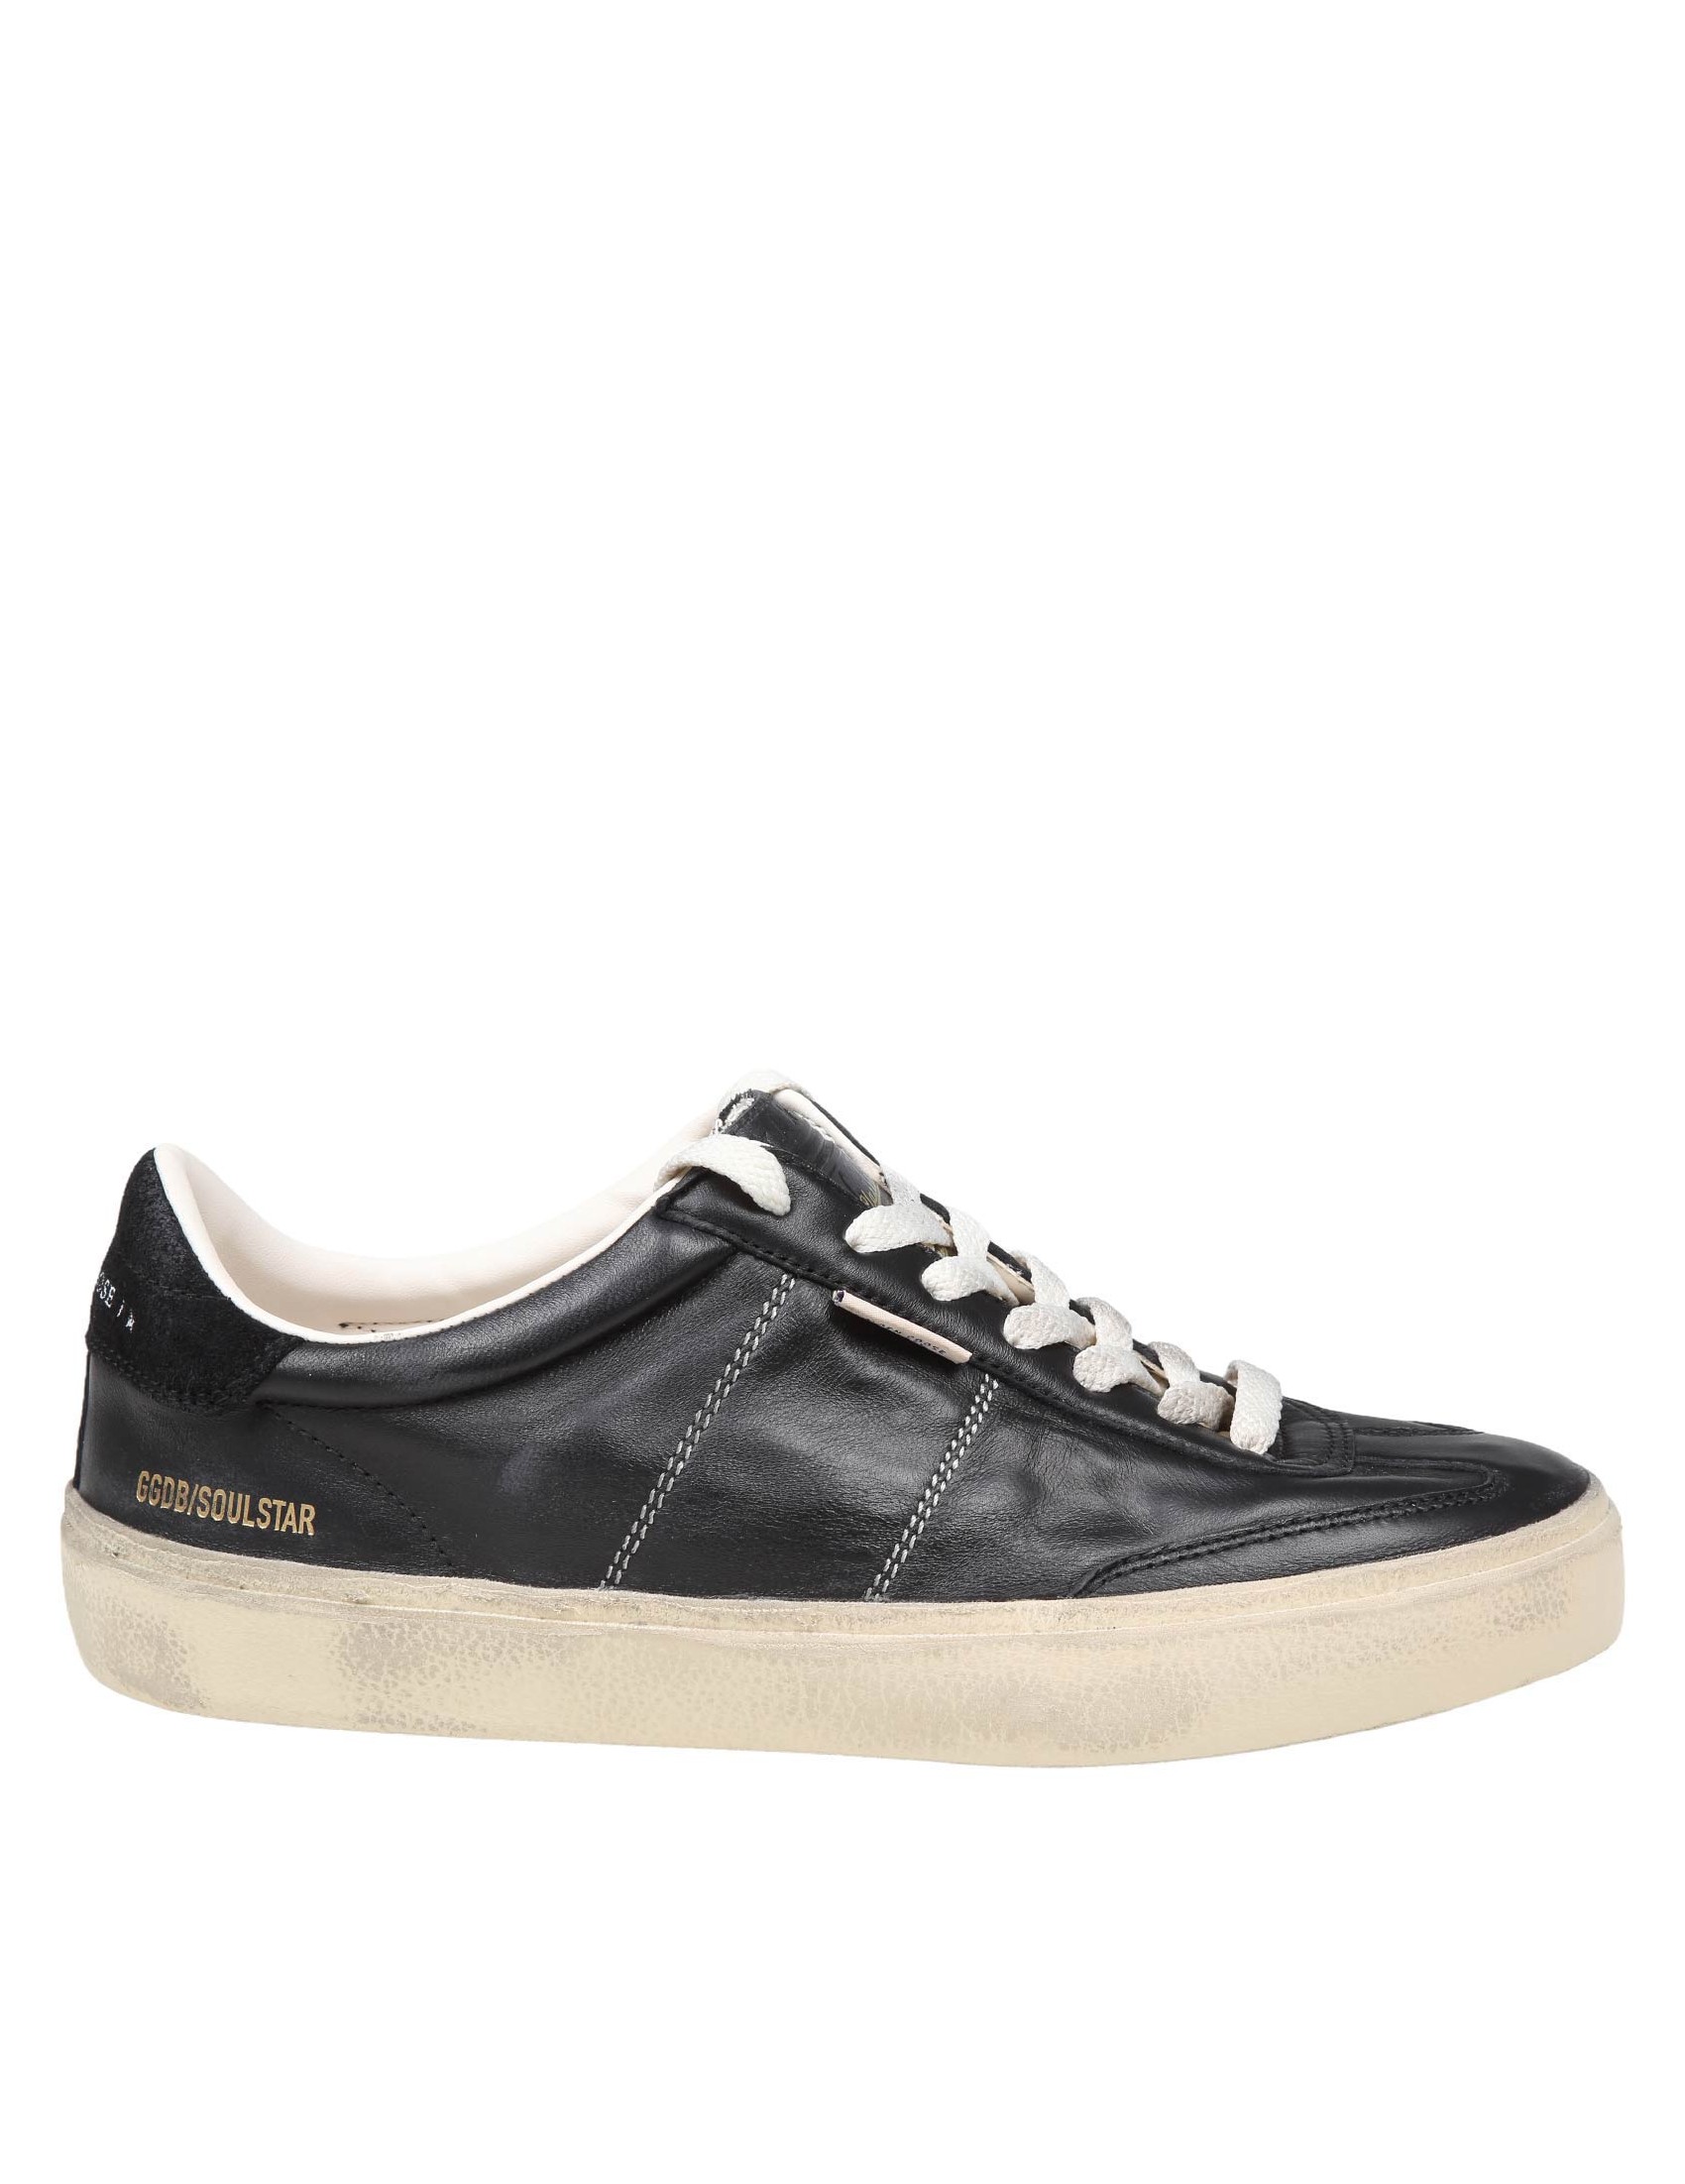 GOLDEN GOOSE SOUL STAR SNEAKERS IN BLACK LEATHER